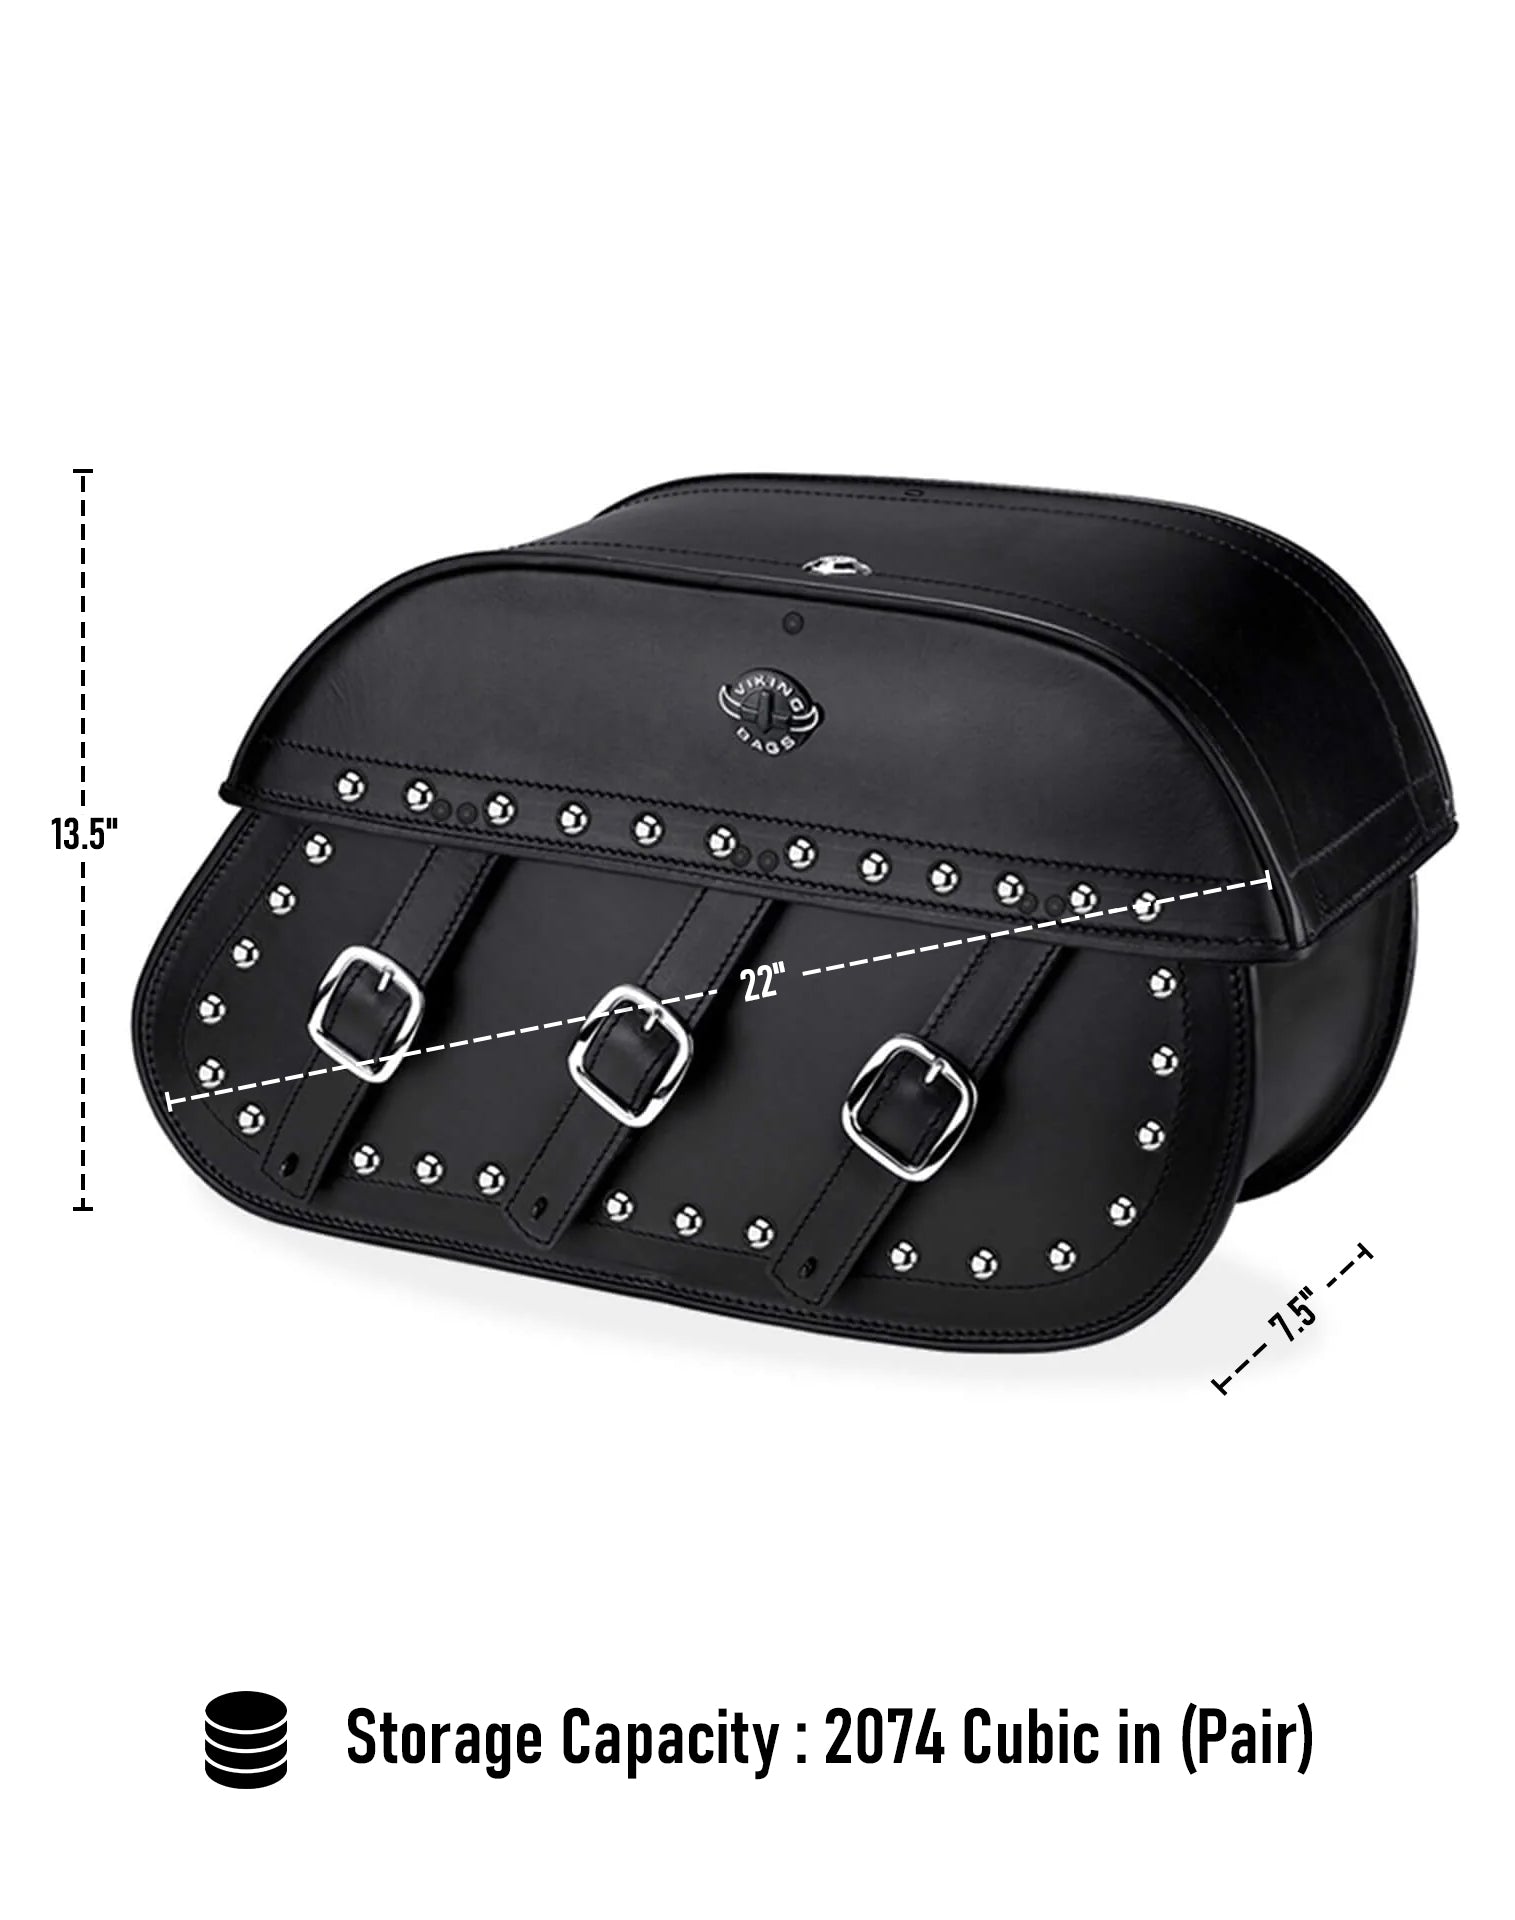 Viking Trianon Extra Large Studded Leather Motorcycle Saddlebags For Harley Softail Custom Fxstc Can Store Your Ridings Gears